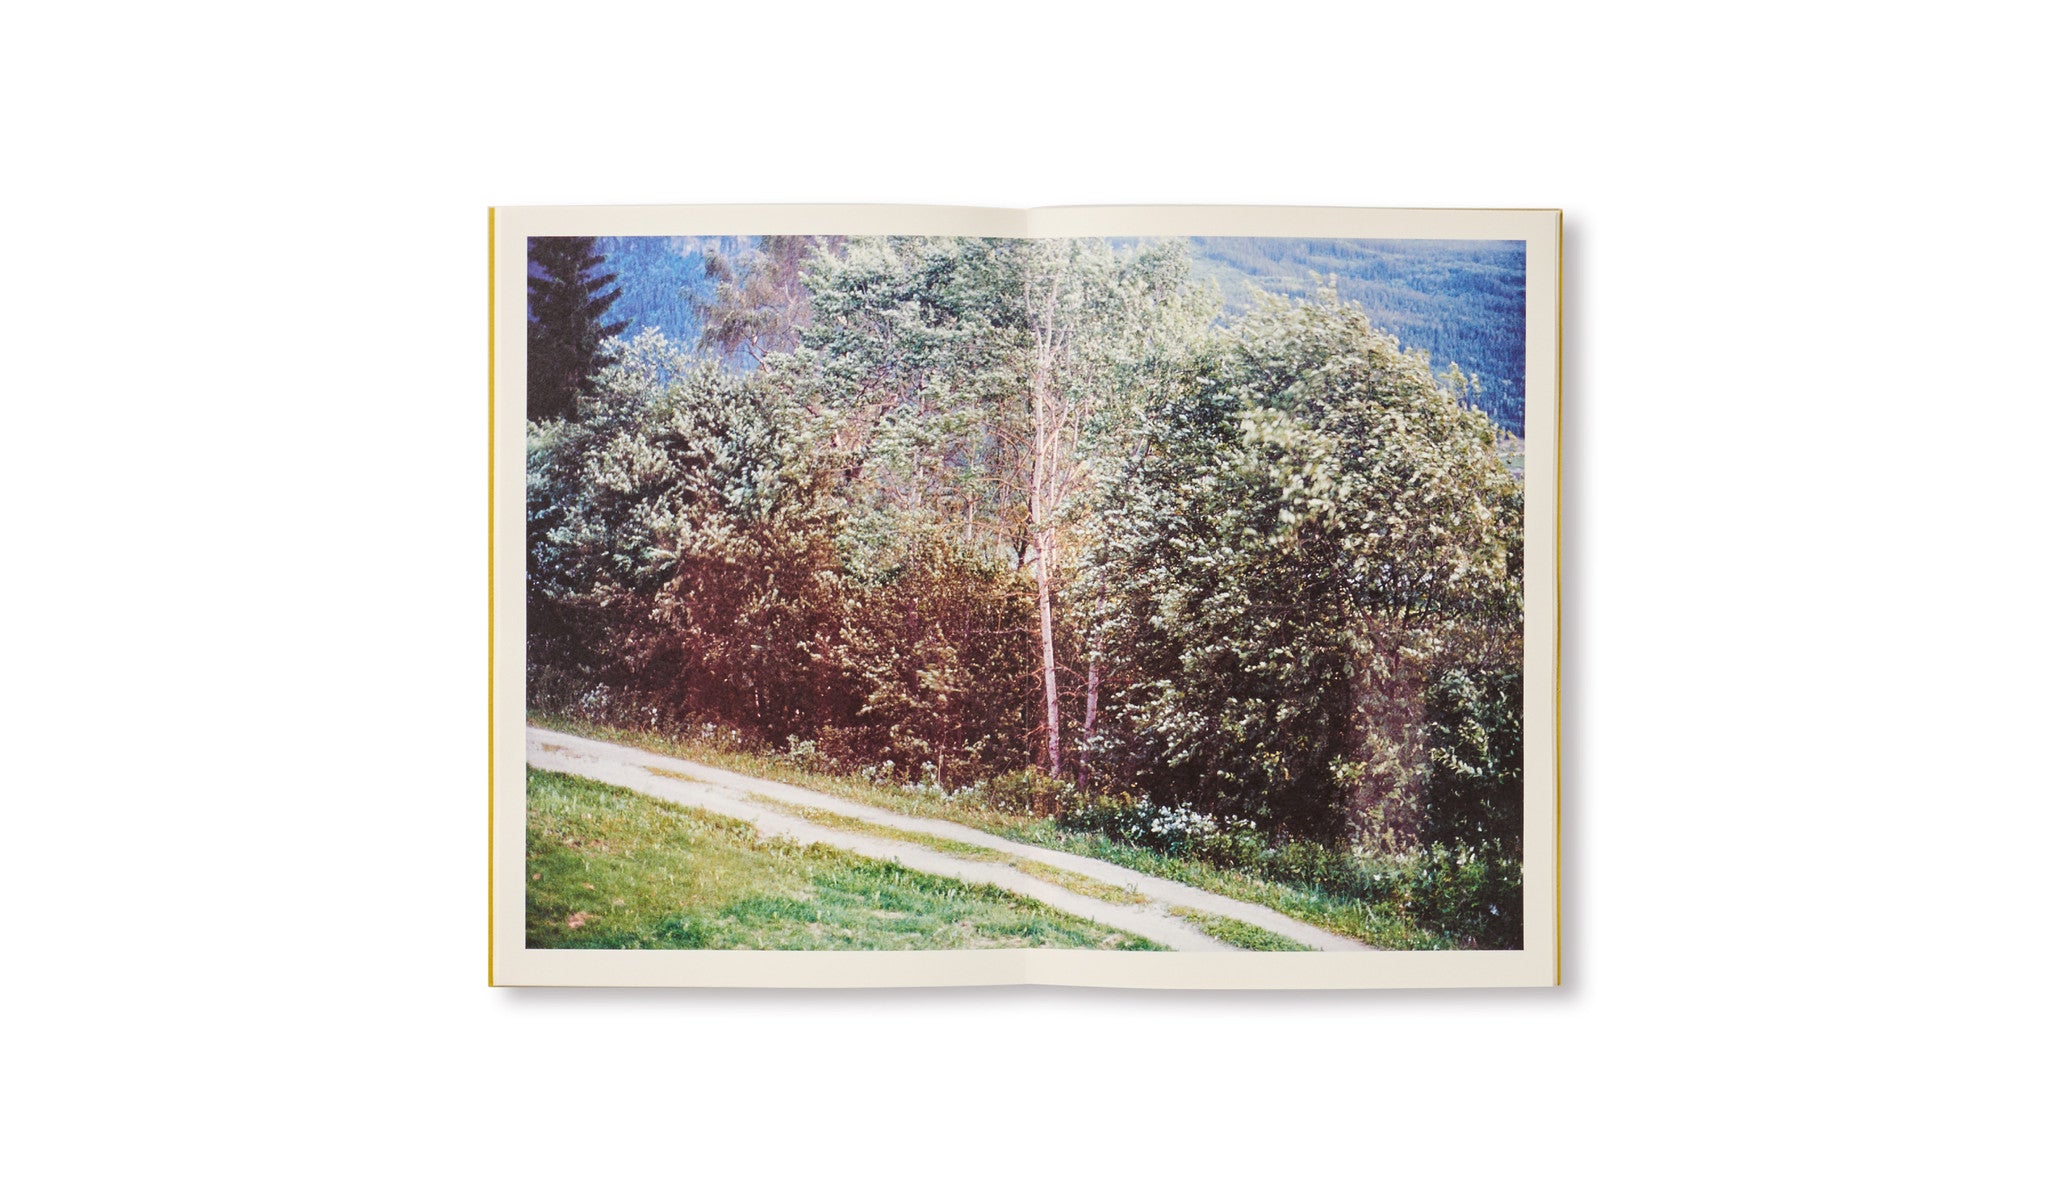 DISTANCE (PICTURES FOR AN UNTOLD STORY) by Ola Rindal [SIGNED]